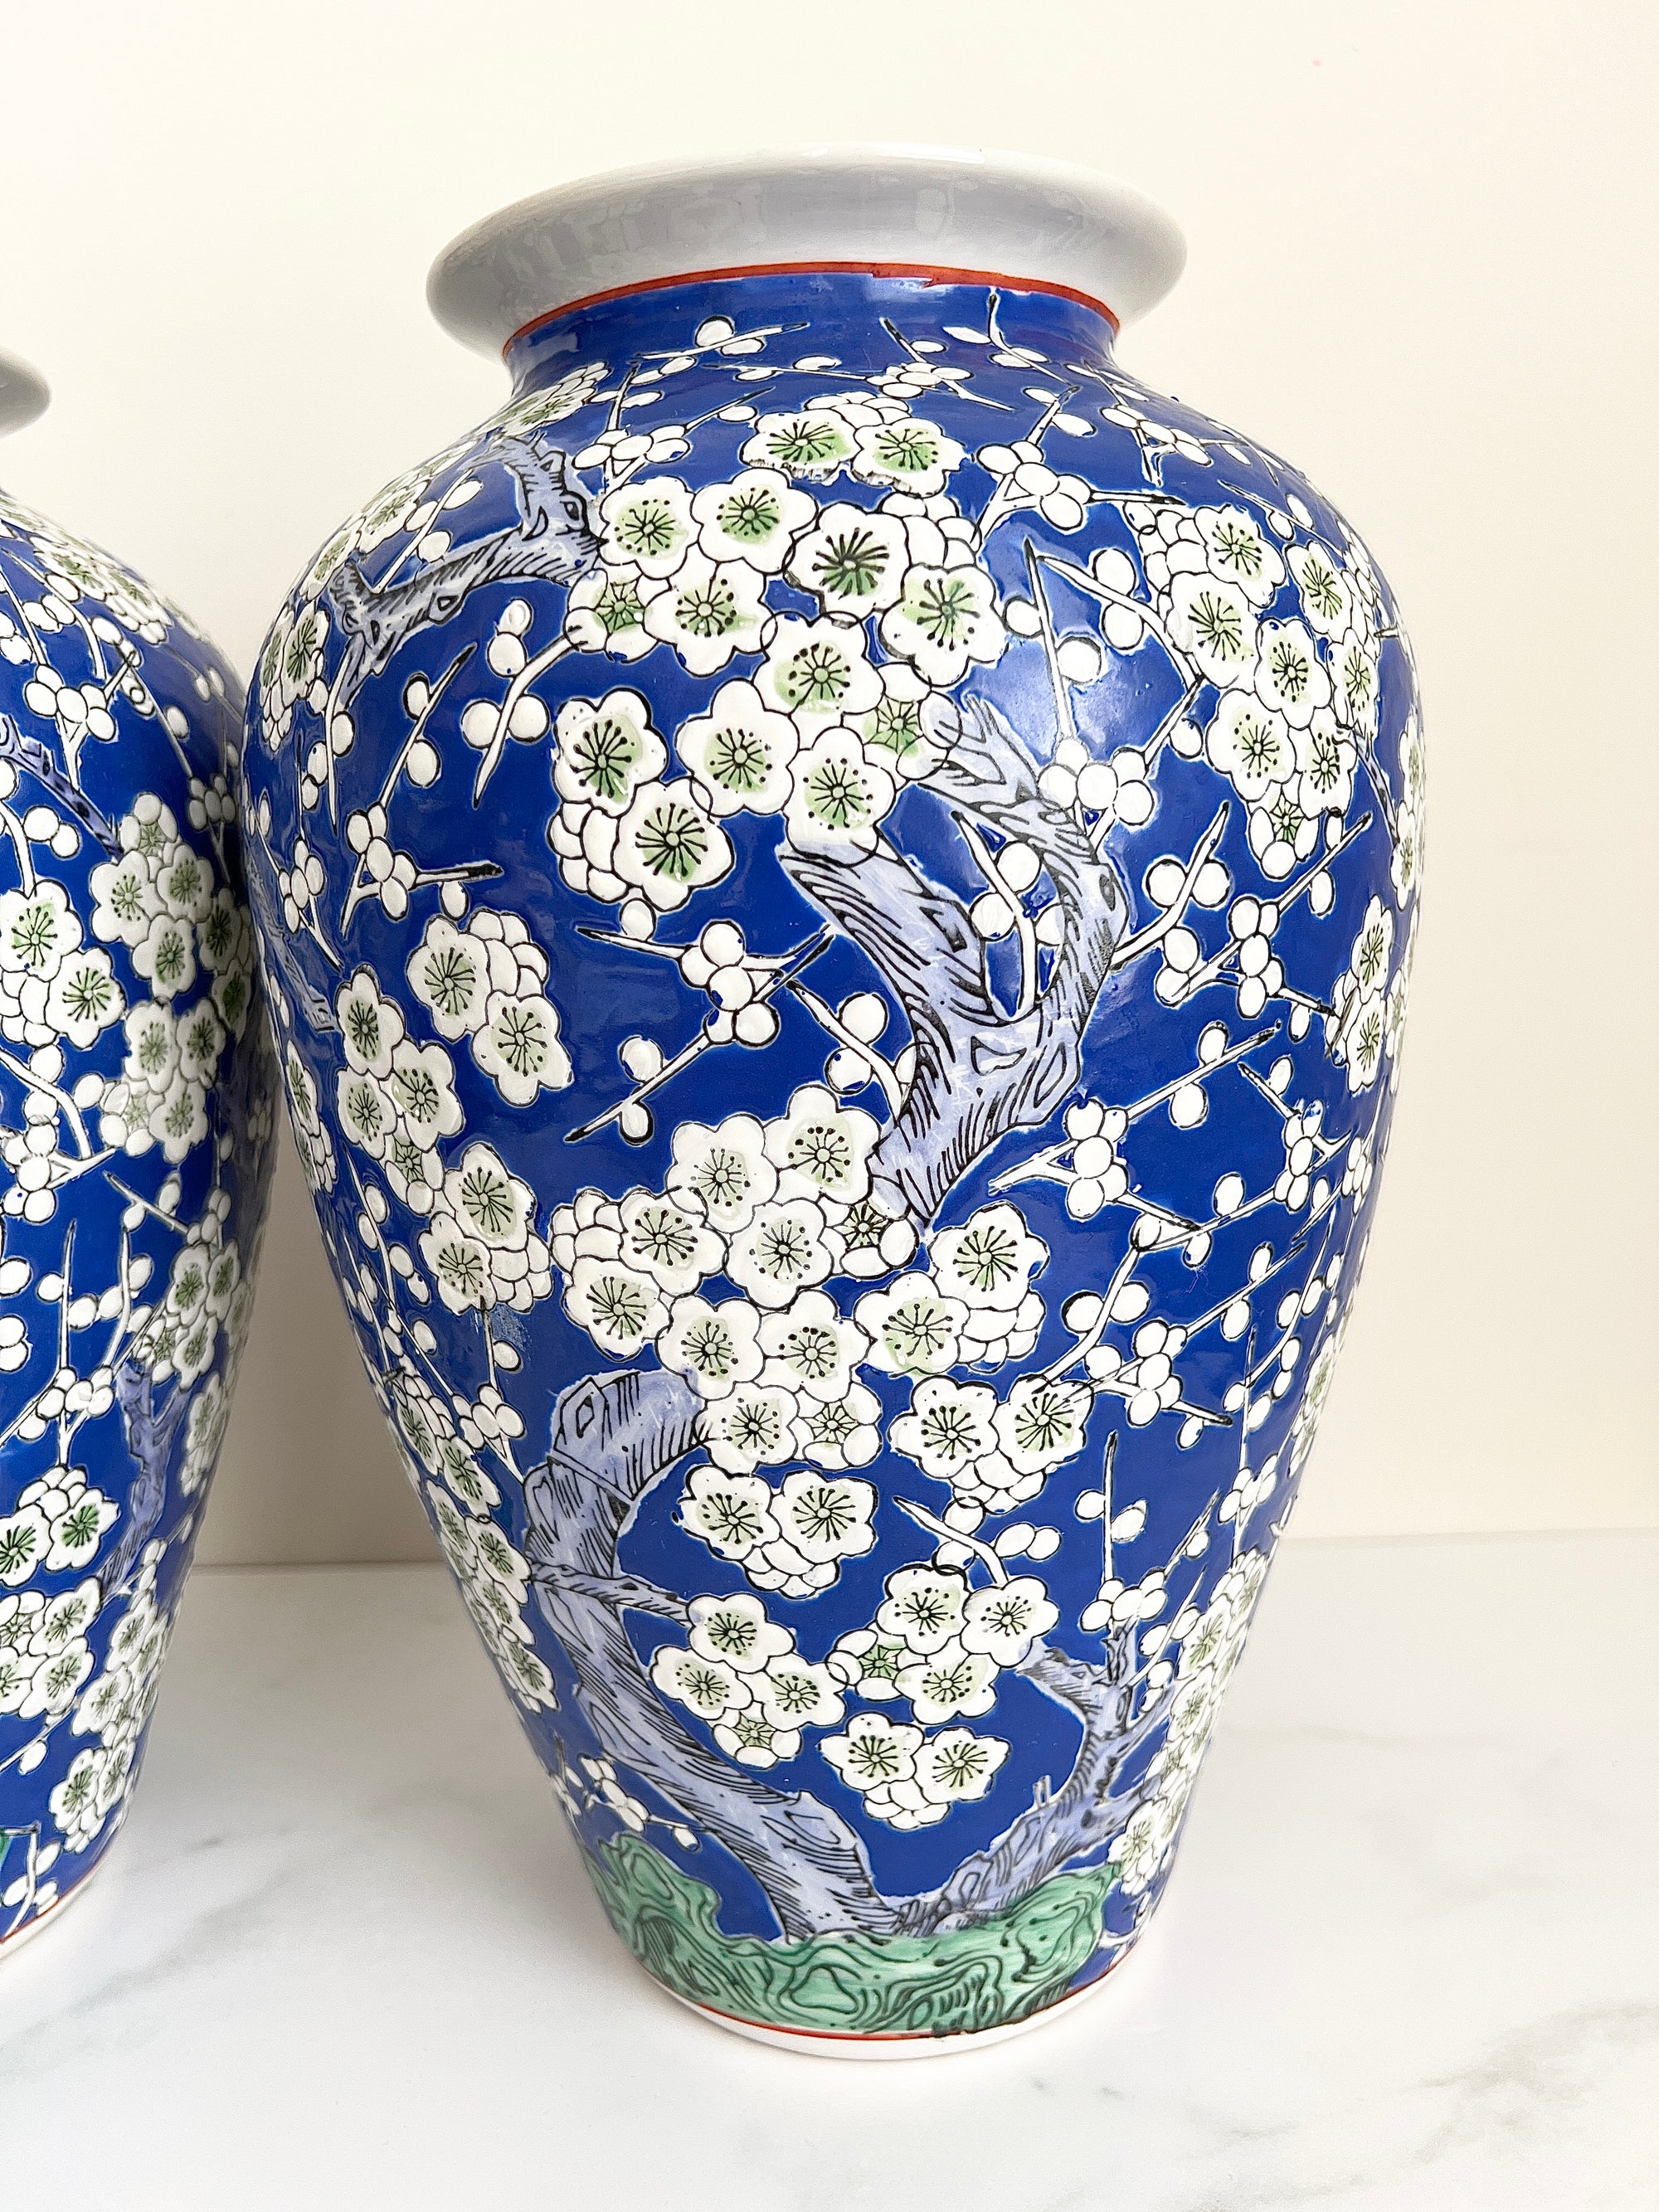 A Pair of Vintage 1980s Handcrafted Asian Vase